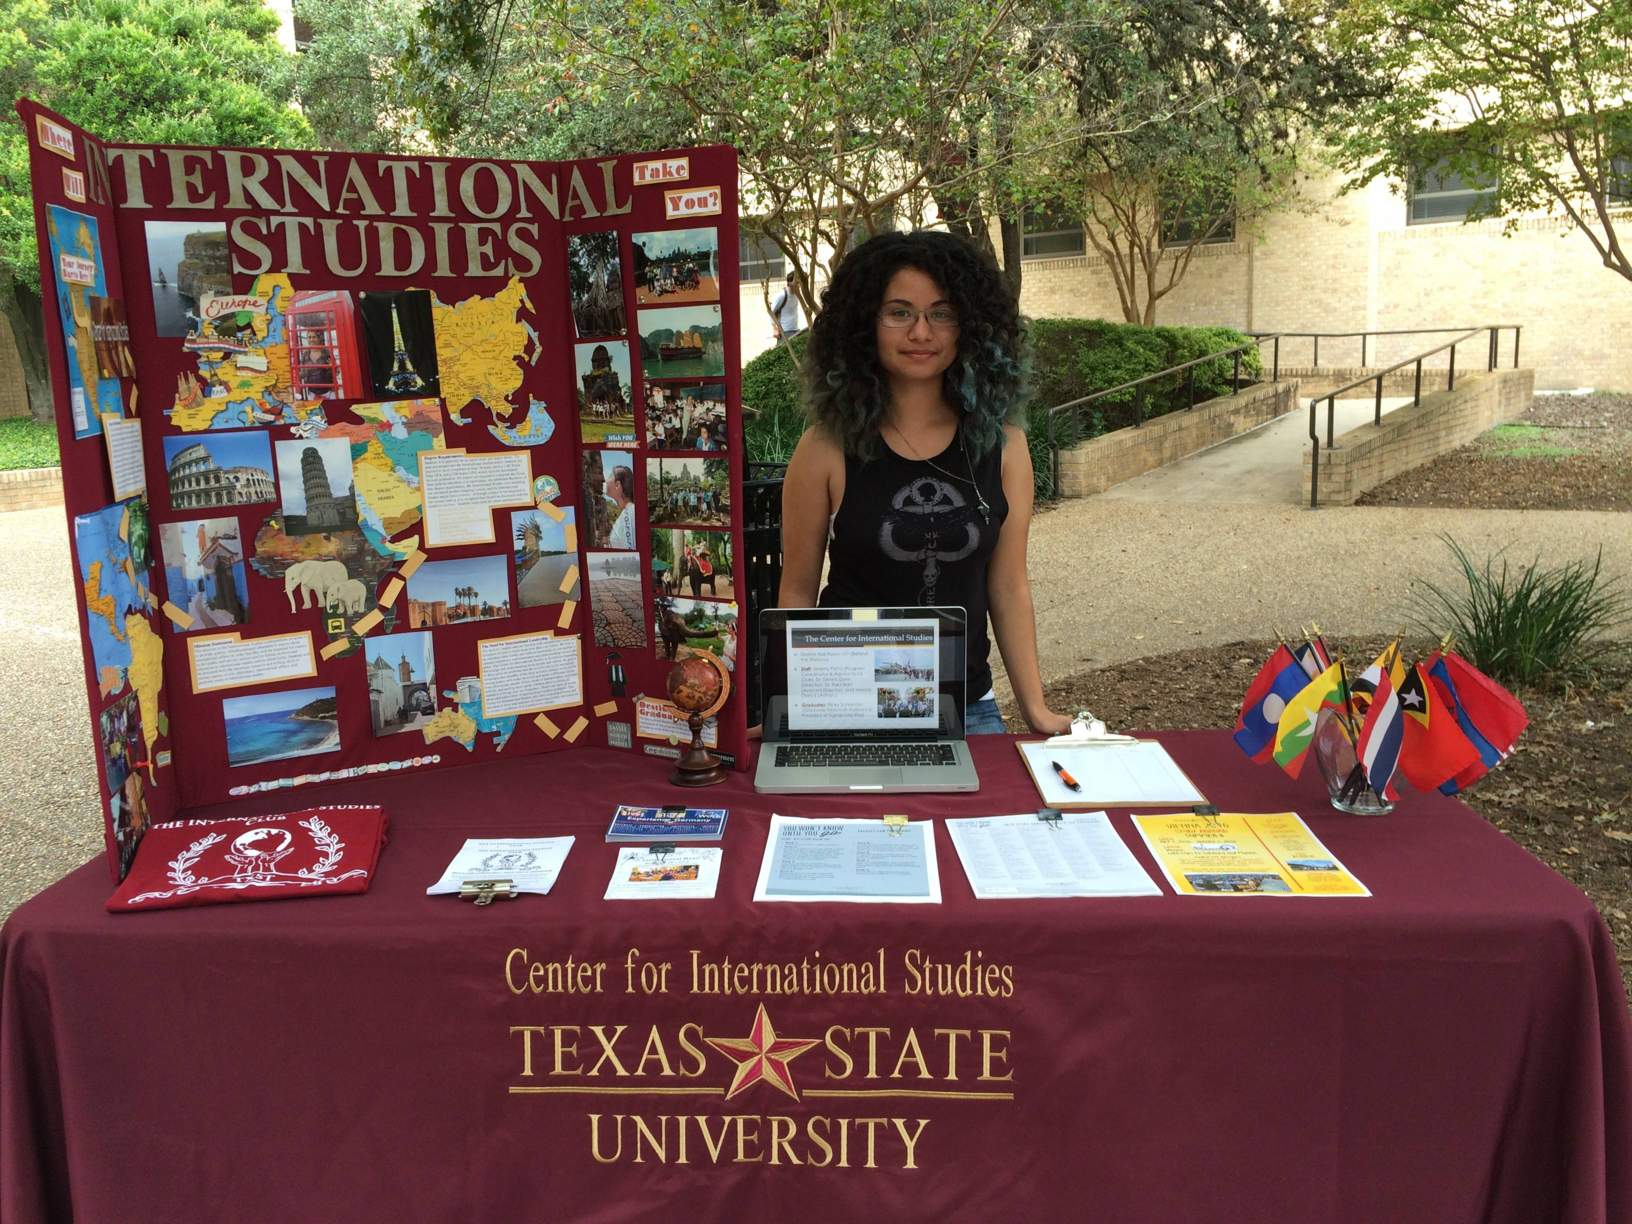 An International Studies student stands at a booth in the Texas State Quad